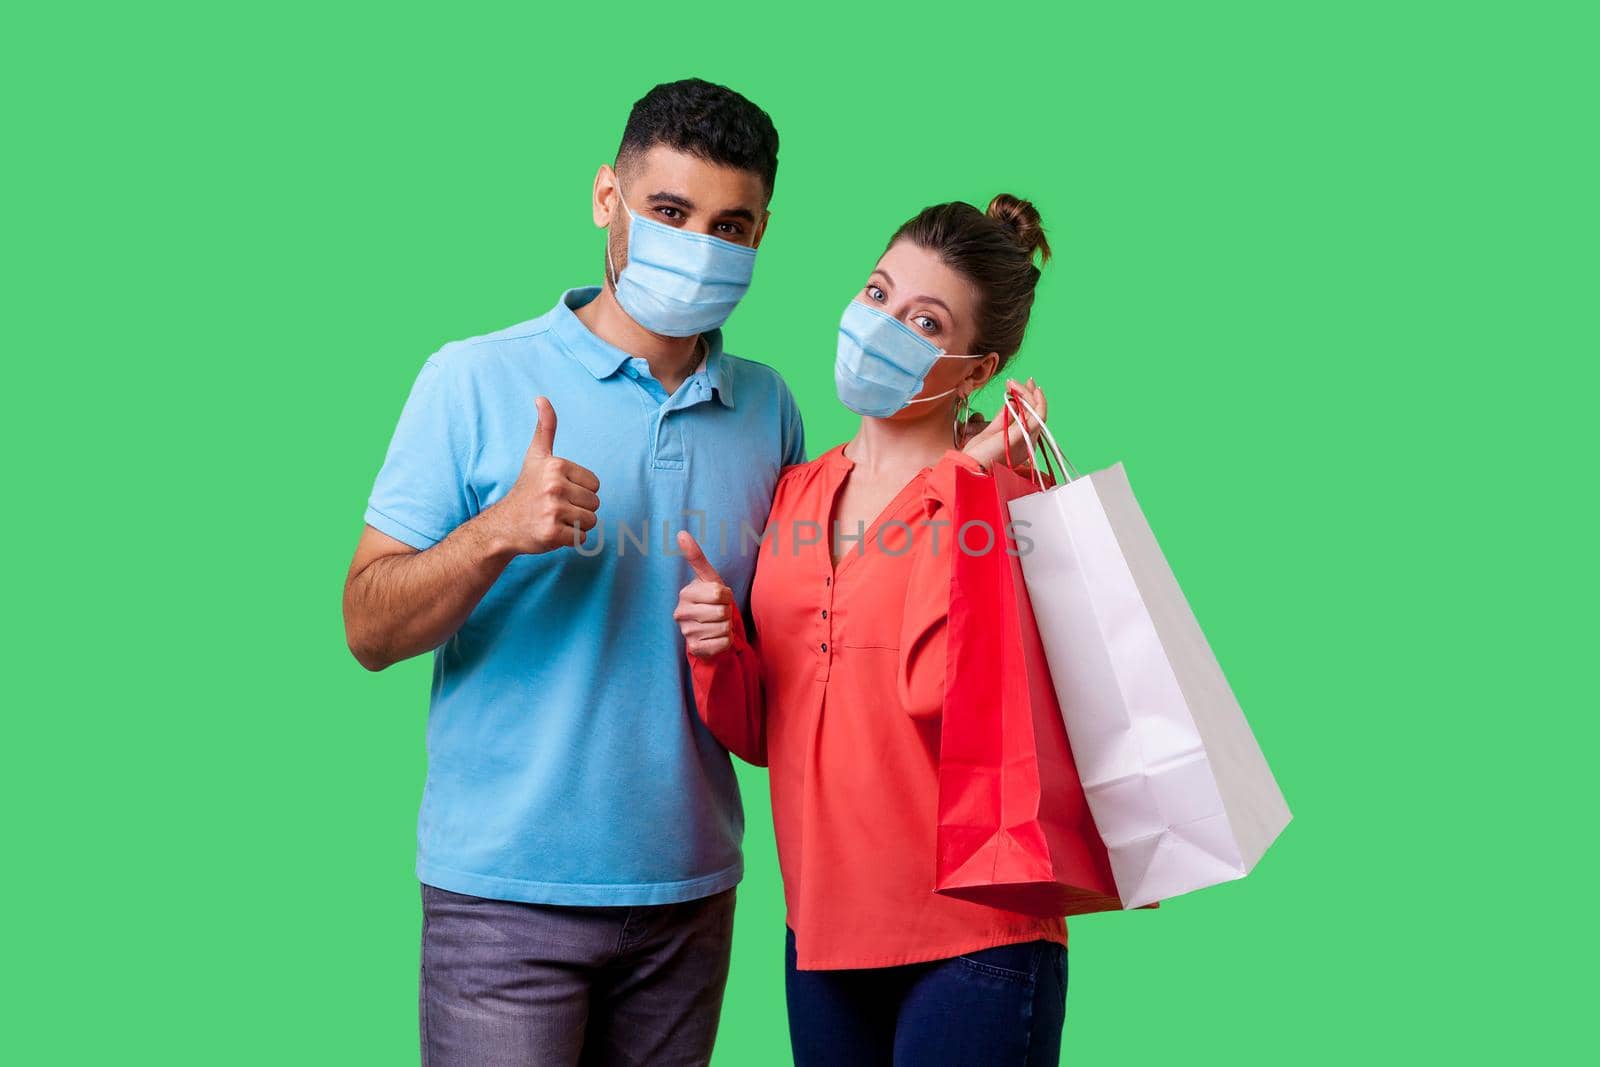 Portrait of satisfied young couple with surgical medical masks showing thumbs up gesture together, cute woman holding bags and smiling. isolated on green background, indoor studio shot